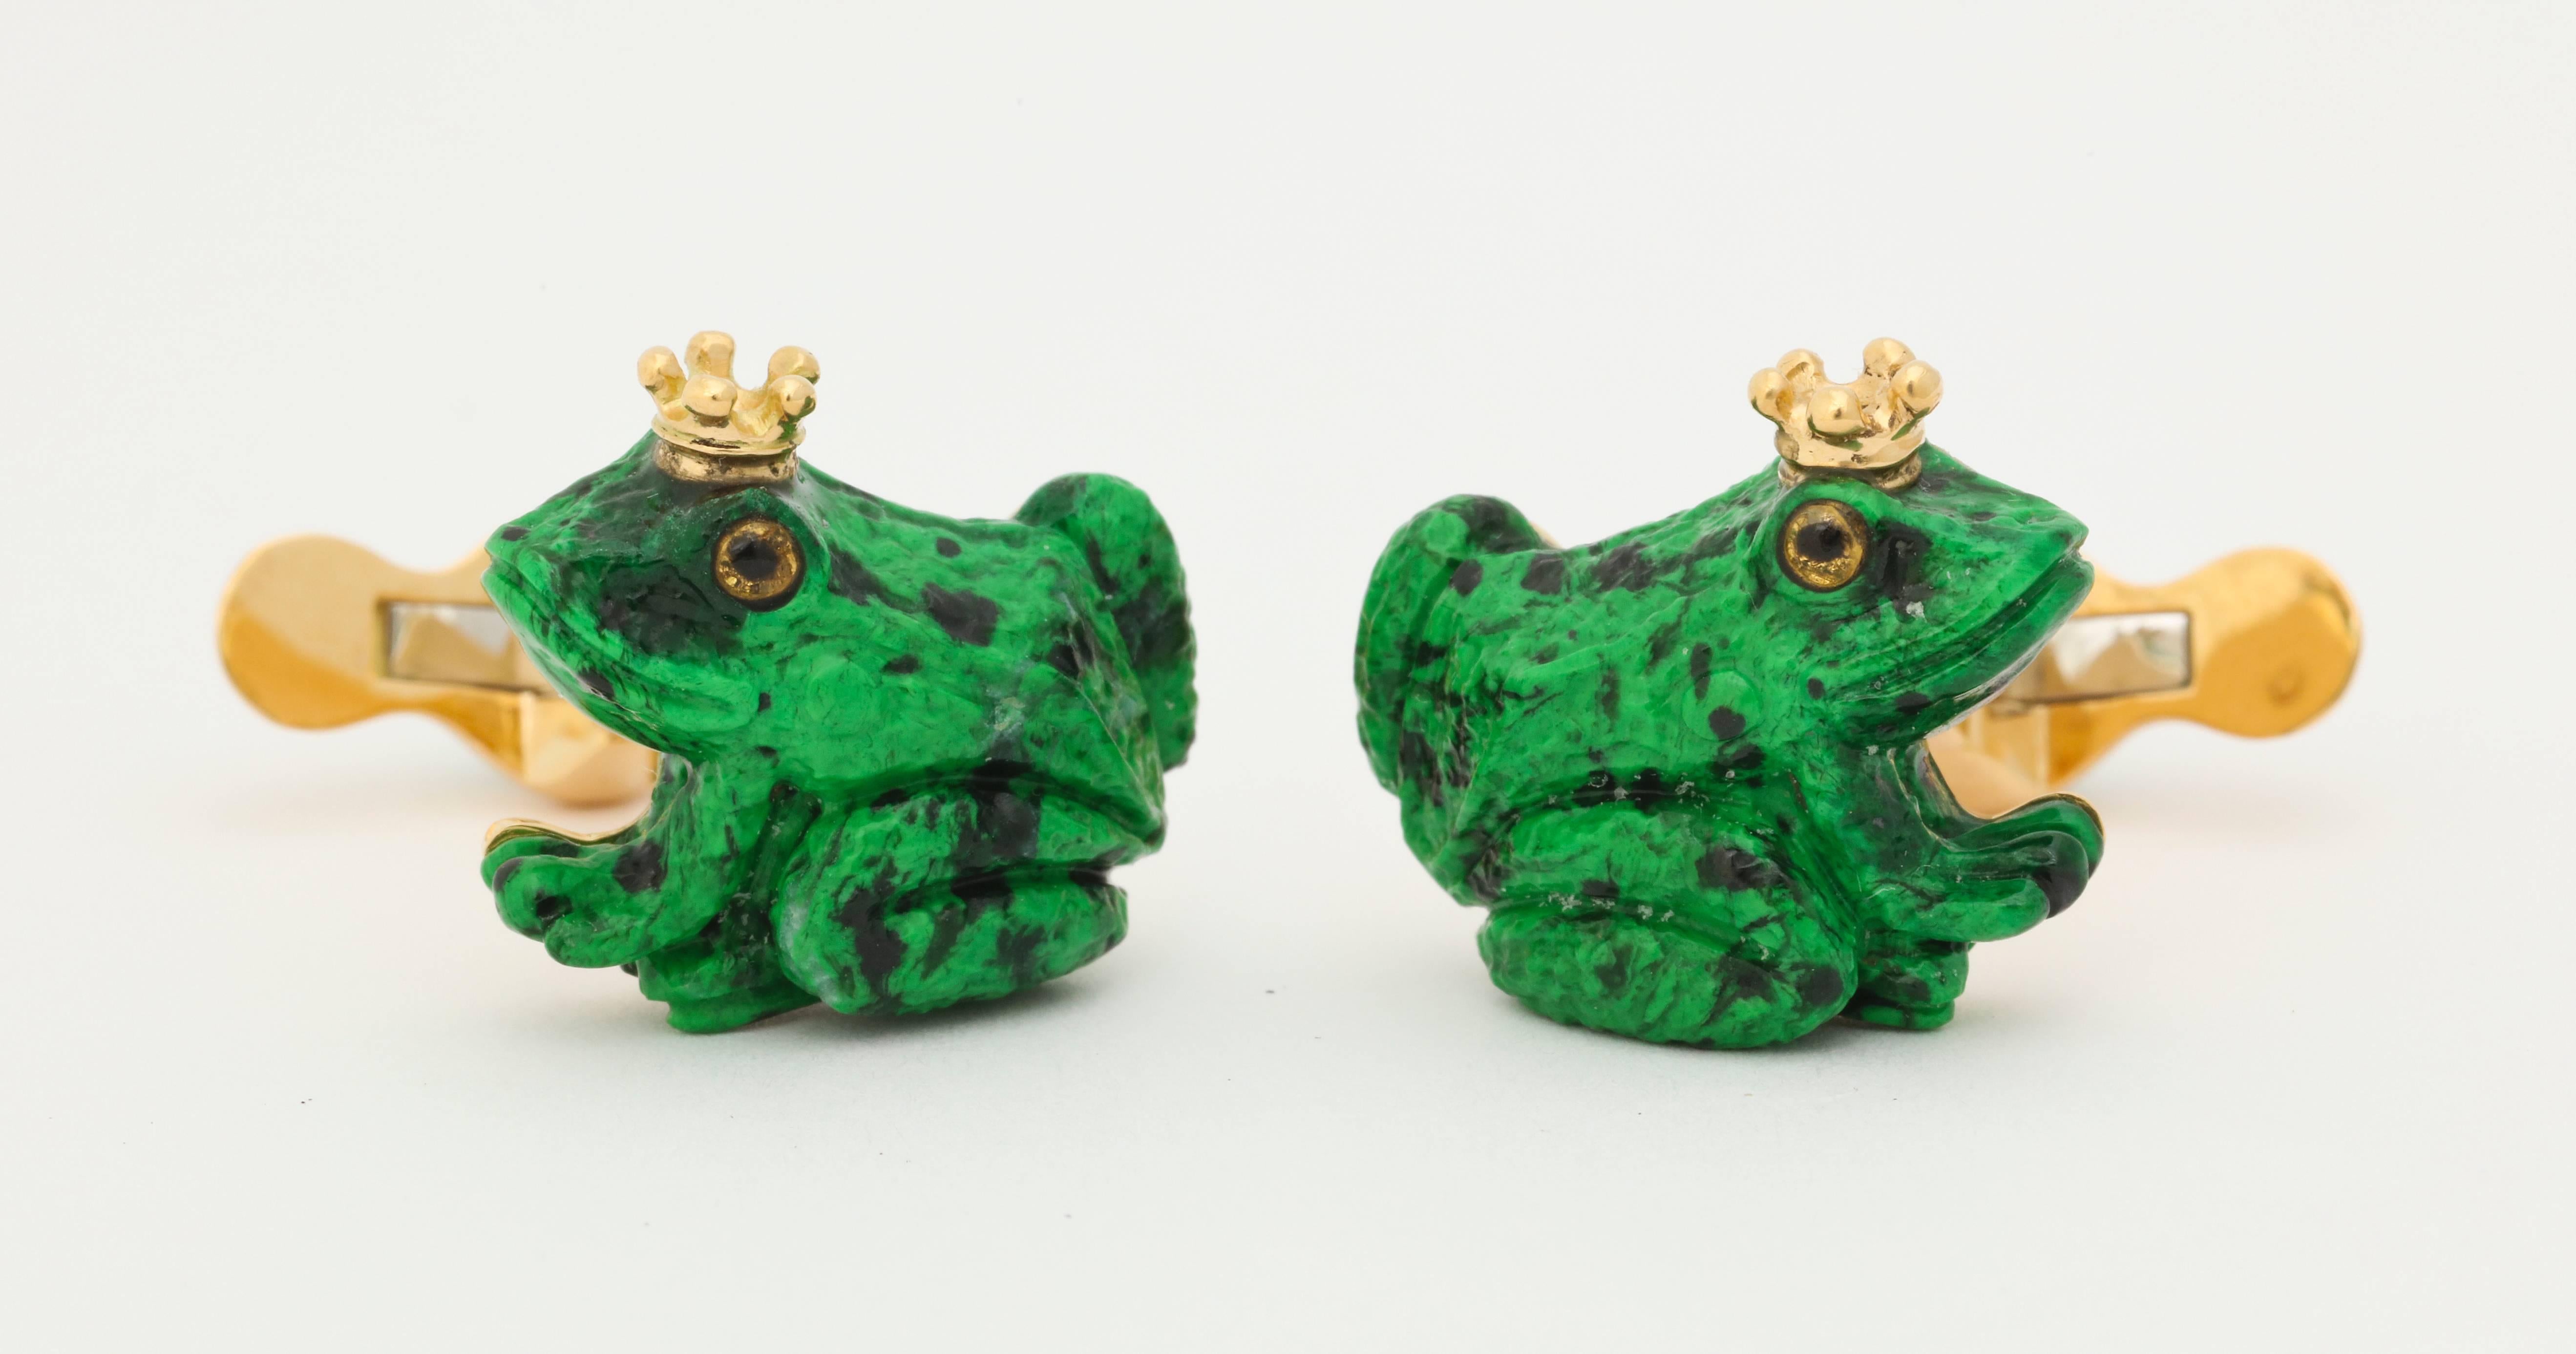 Expertly carved from maw-sit-sit jade, this regal frog wears an 18kt gold crown.  Other details include rock crystal and enamel eyes and matching jade cabochons set into the spring backs.  Elegant at first glance and discretely amusing upon further